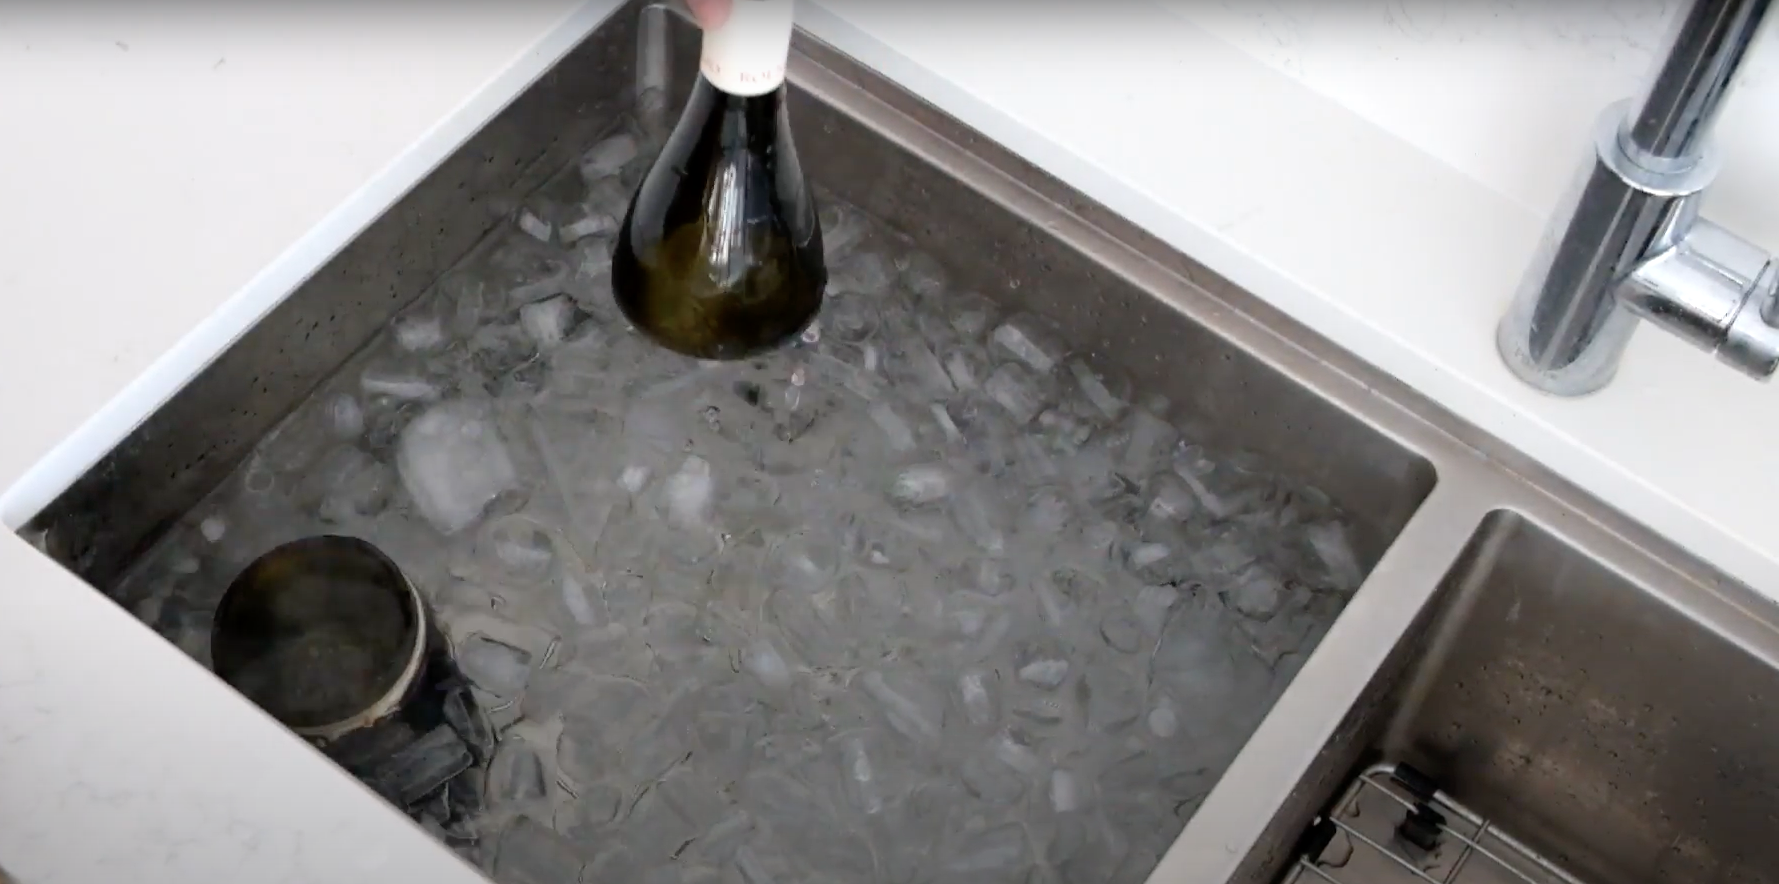 The wine bottle separated in the cold ice bath